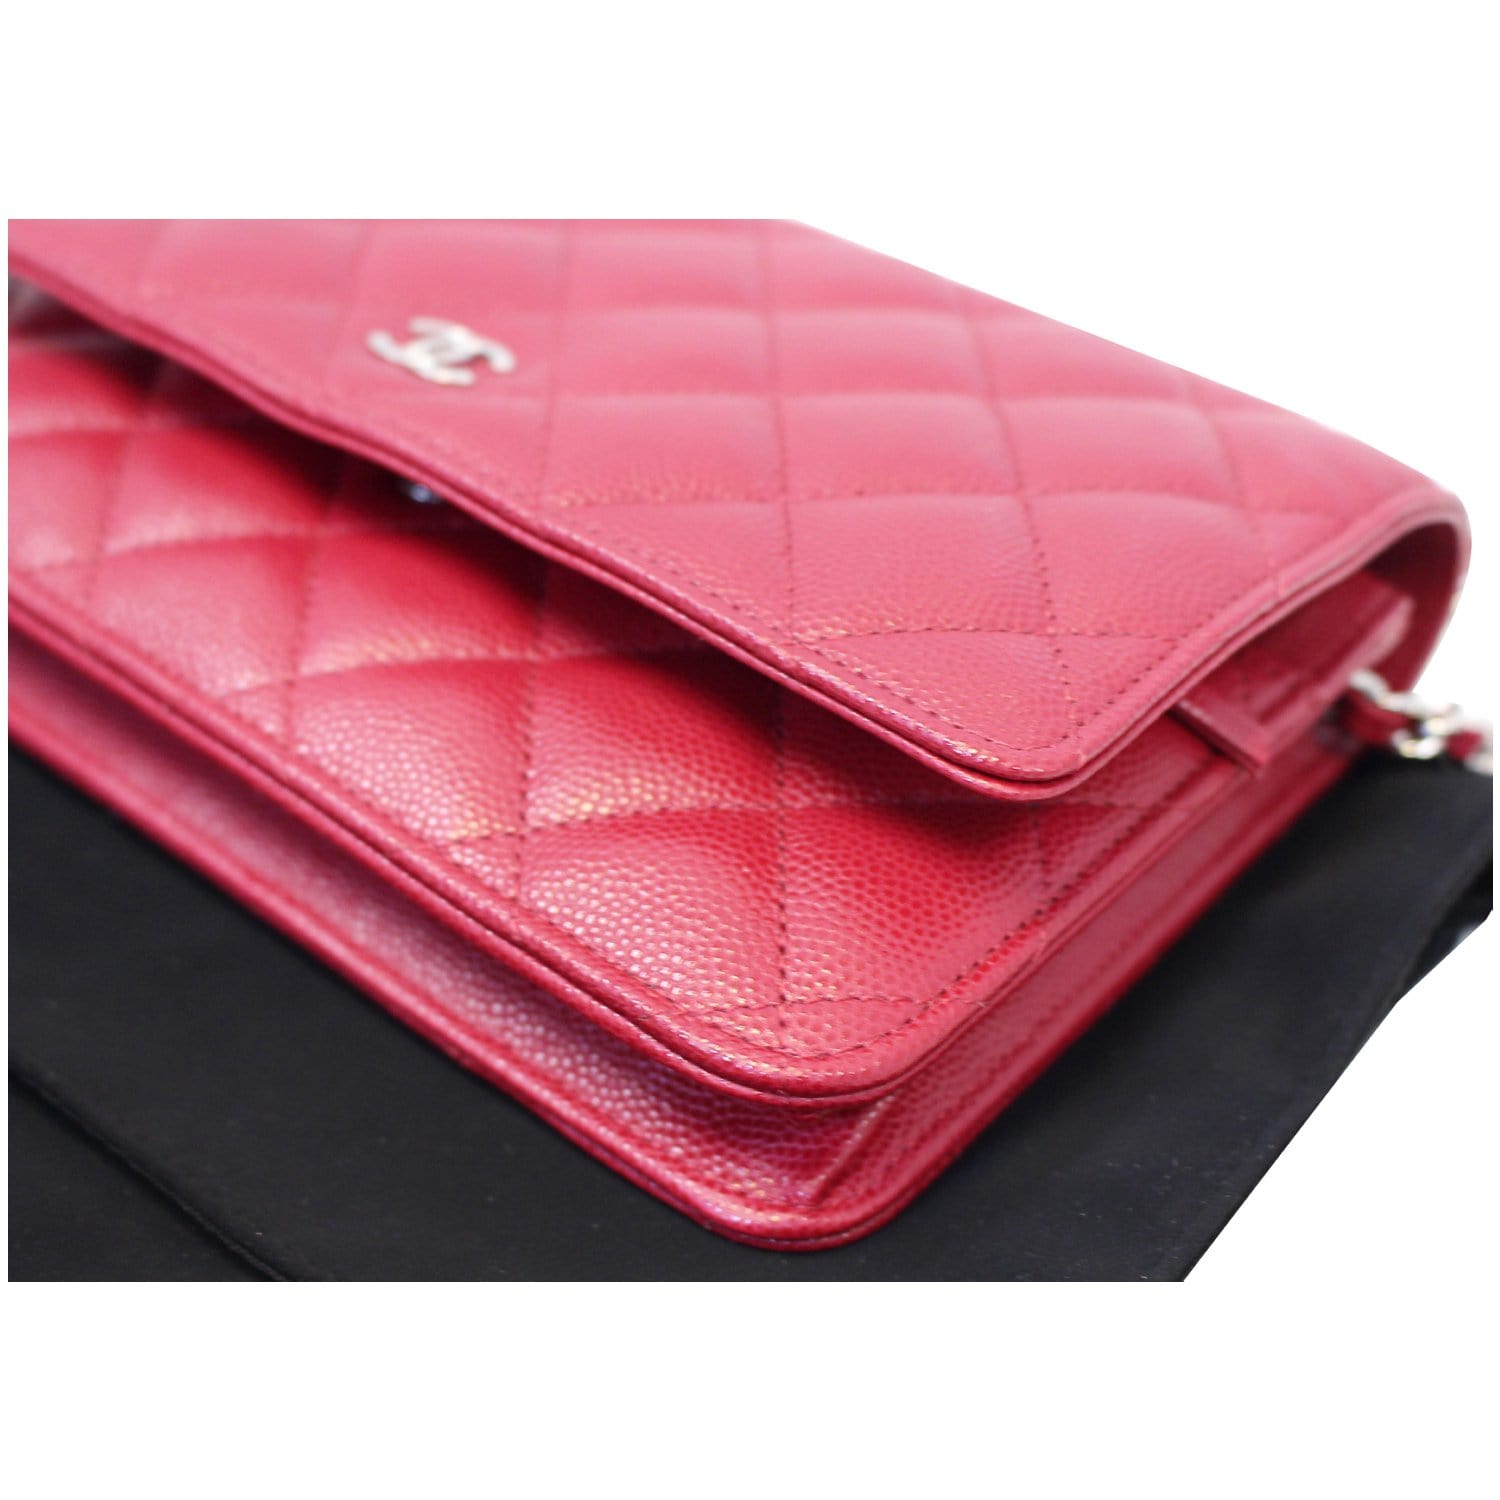 CHANEL Red Clutch Bags & Handbags for Women